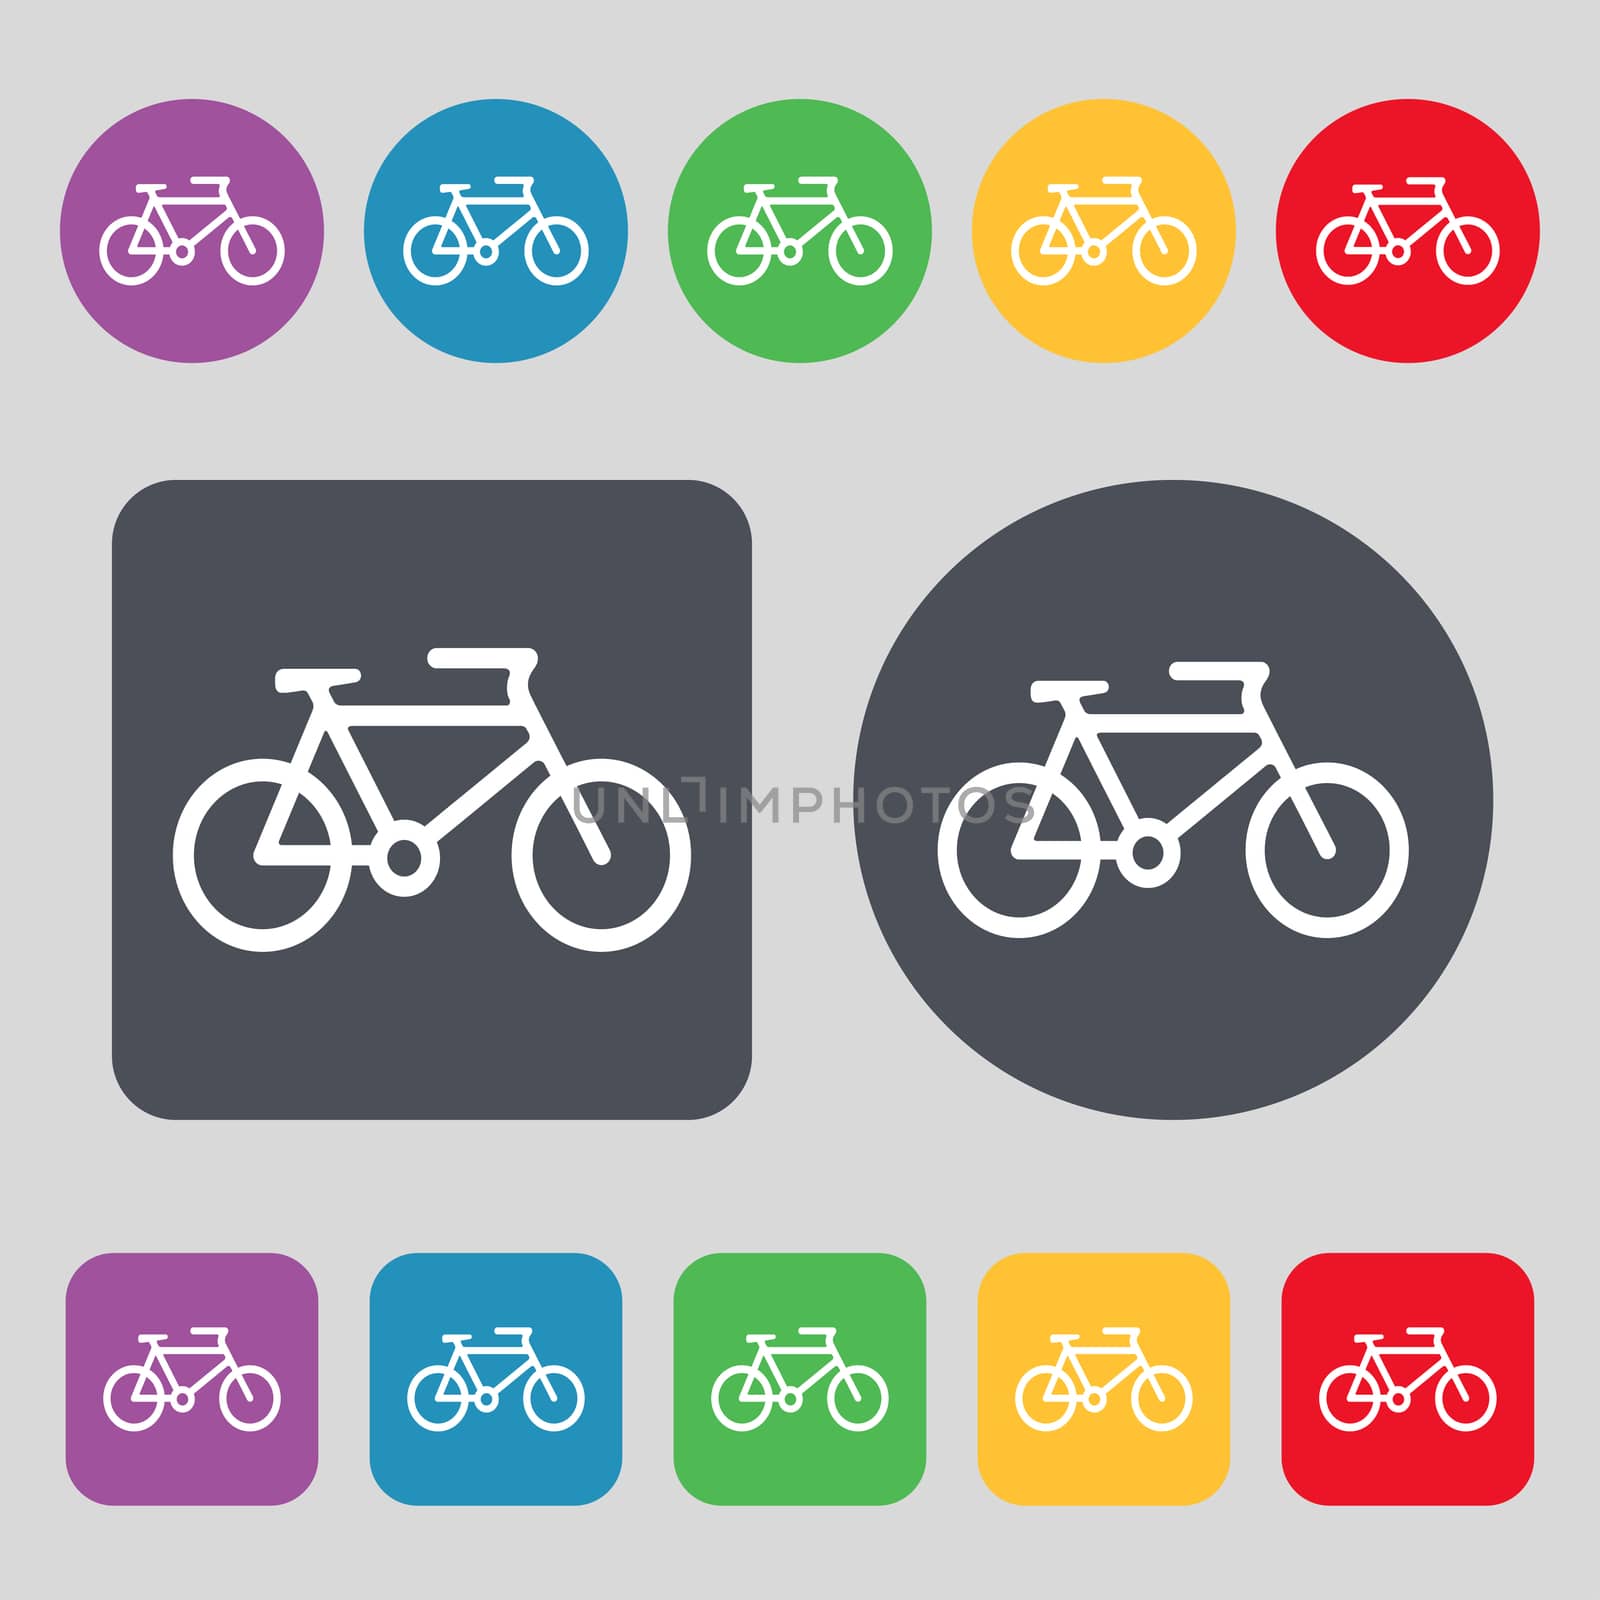 bike icon sign. A set of 12 colored buttons. Flat design. illustration